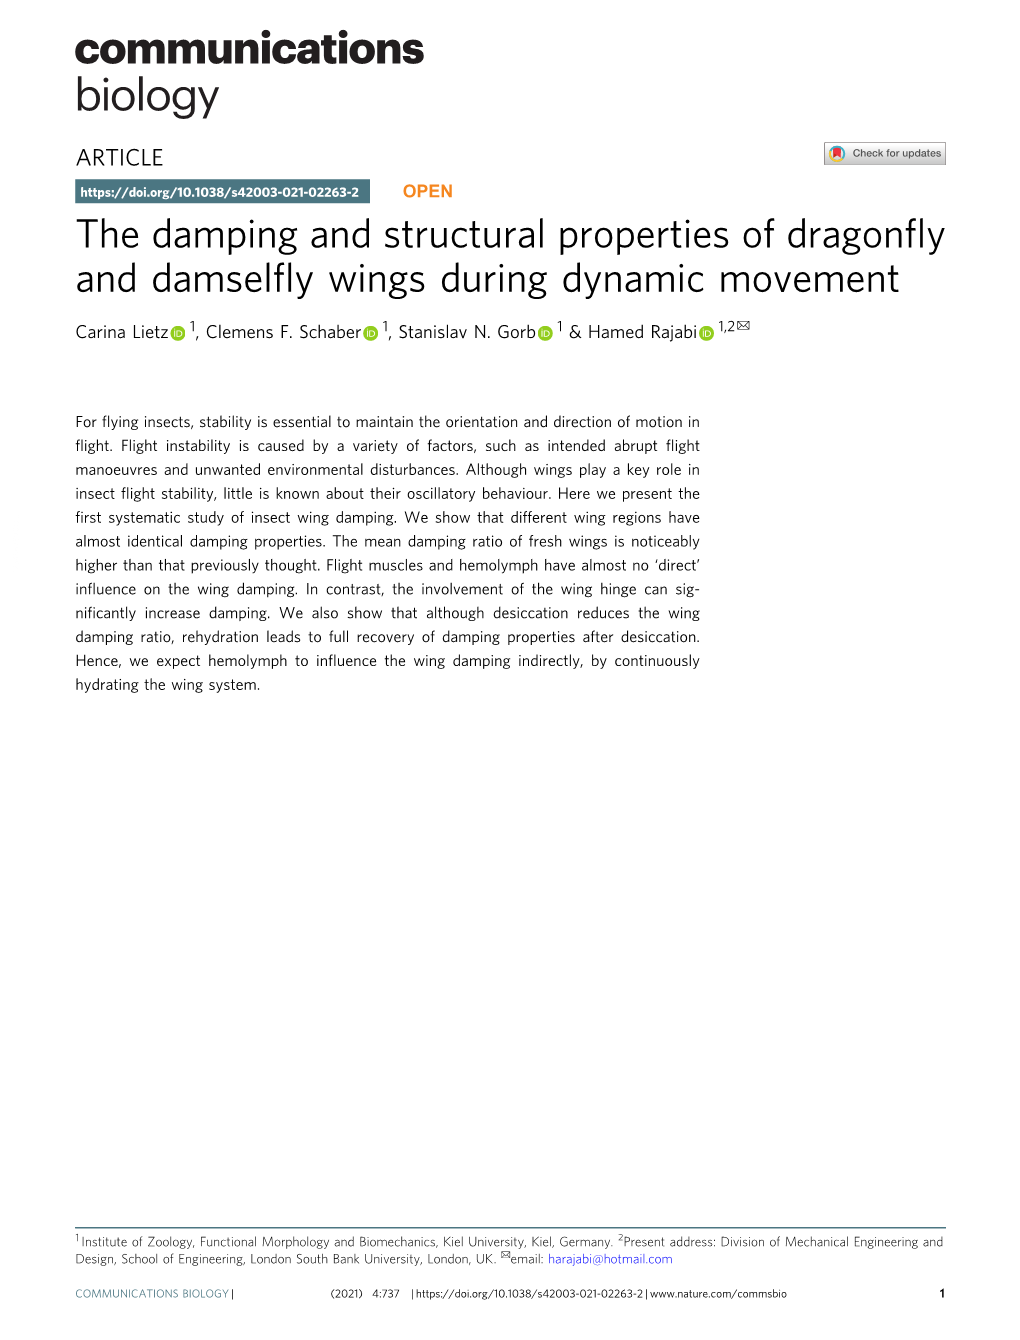 The Damping and Structural Properties of Dragonfly and Damselfly Wings During Dynamic Movement